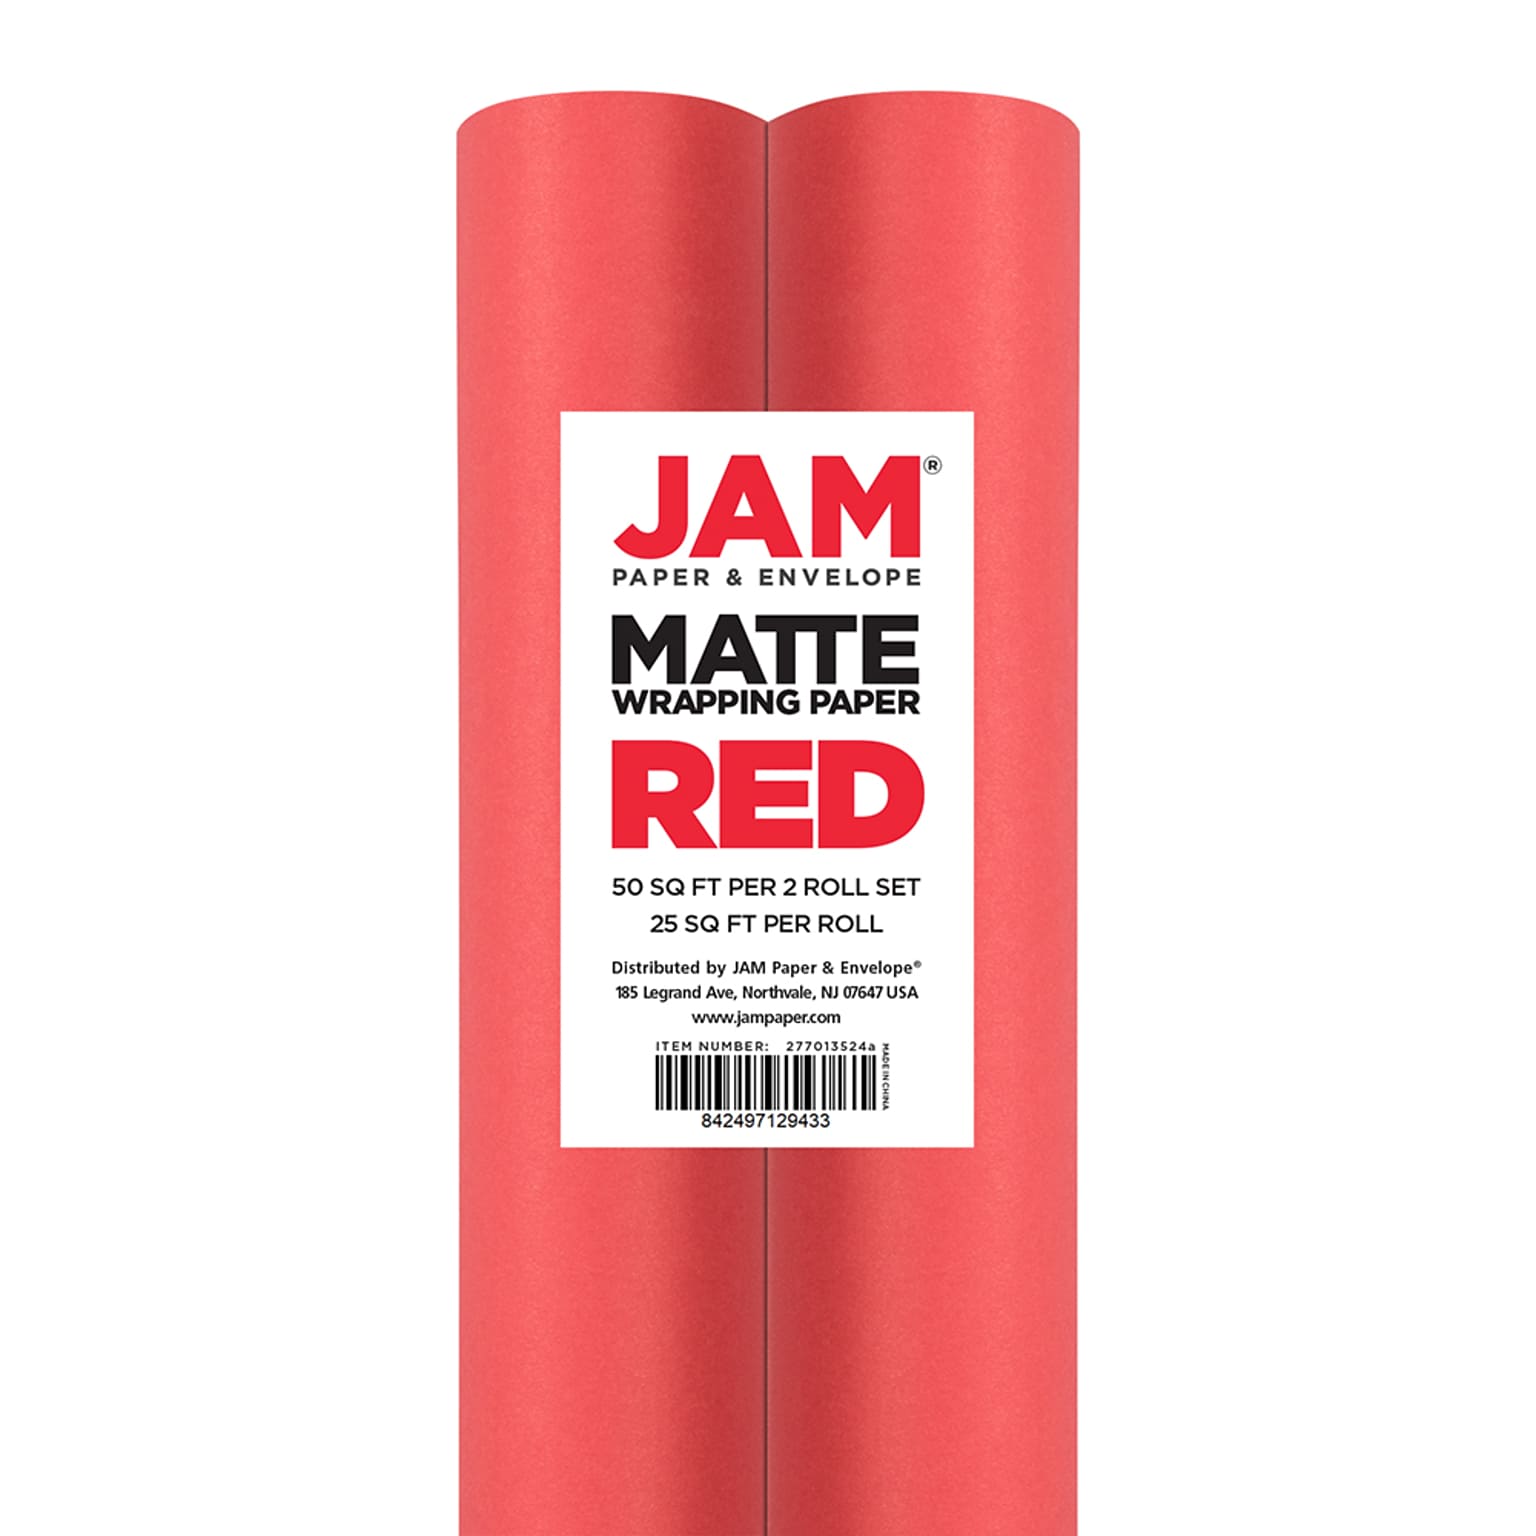 JAM PAPER Gift Wrap, Matte Wrapping Paper, 25 Sq Ft per Roll, Matte Red, 2/Pack